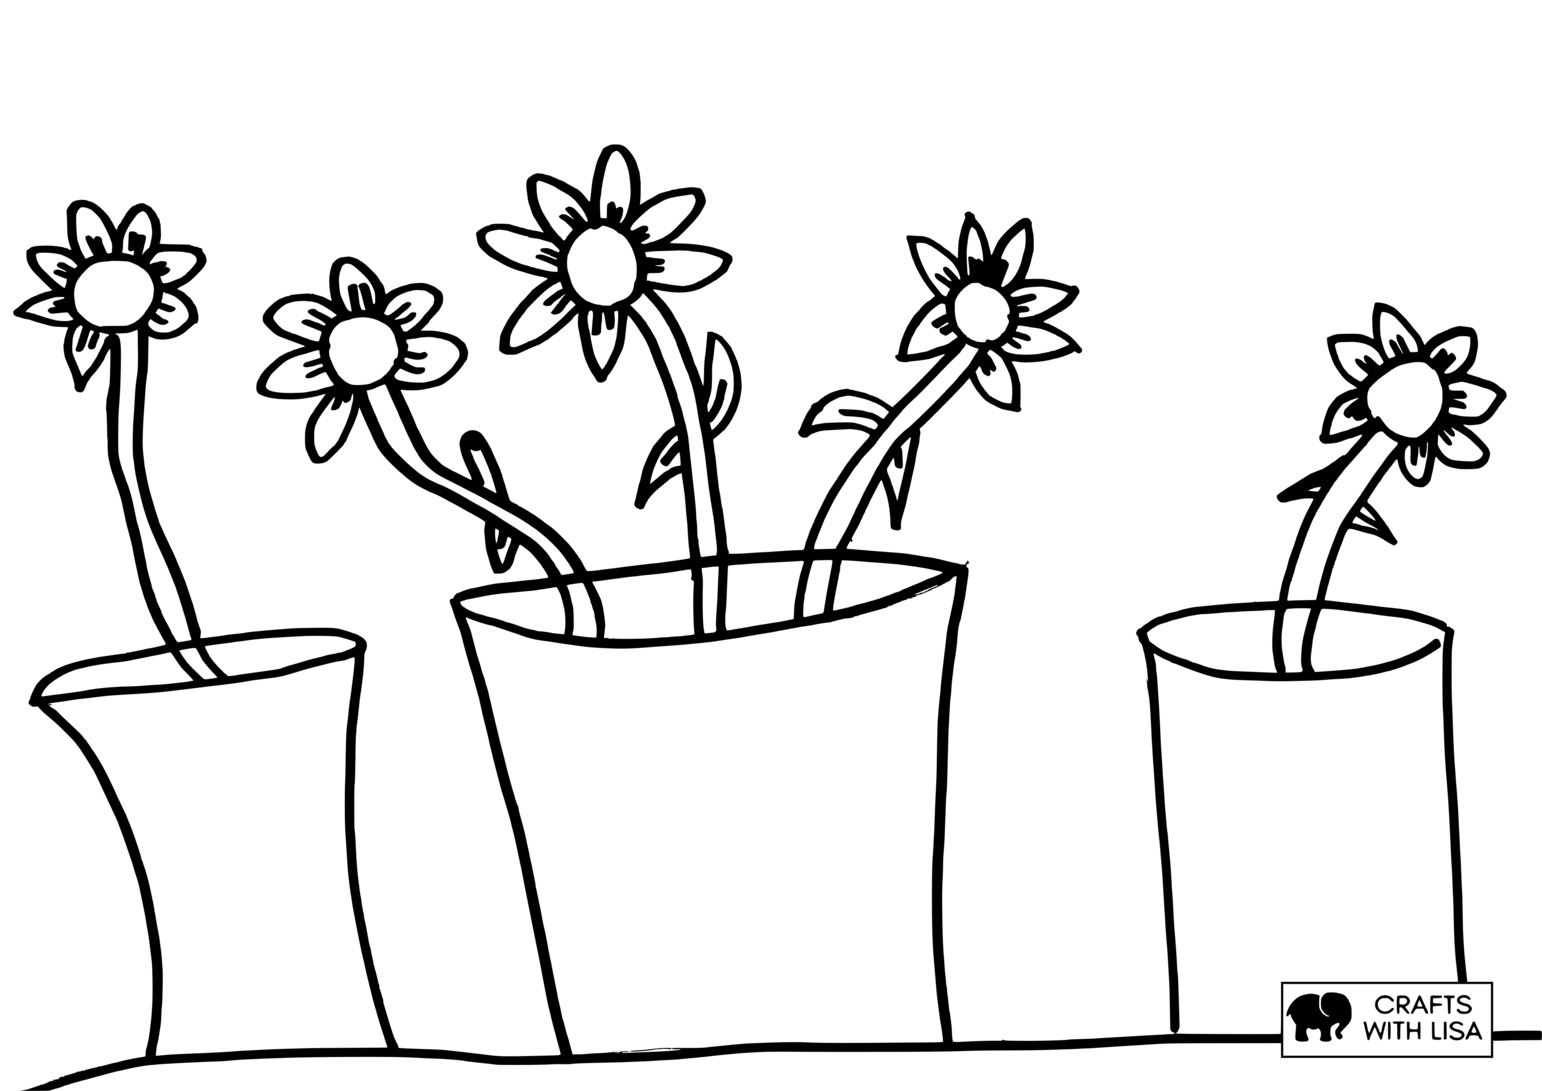 Flower in pots coloring page